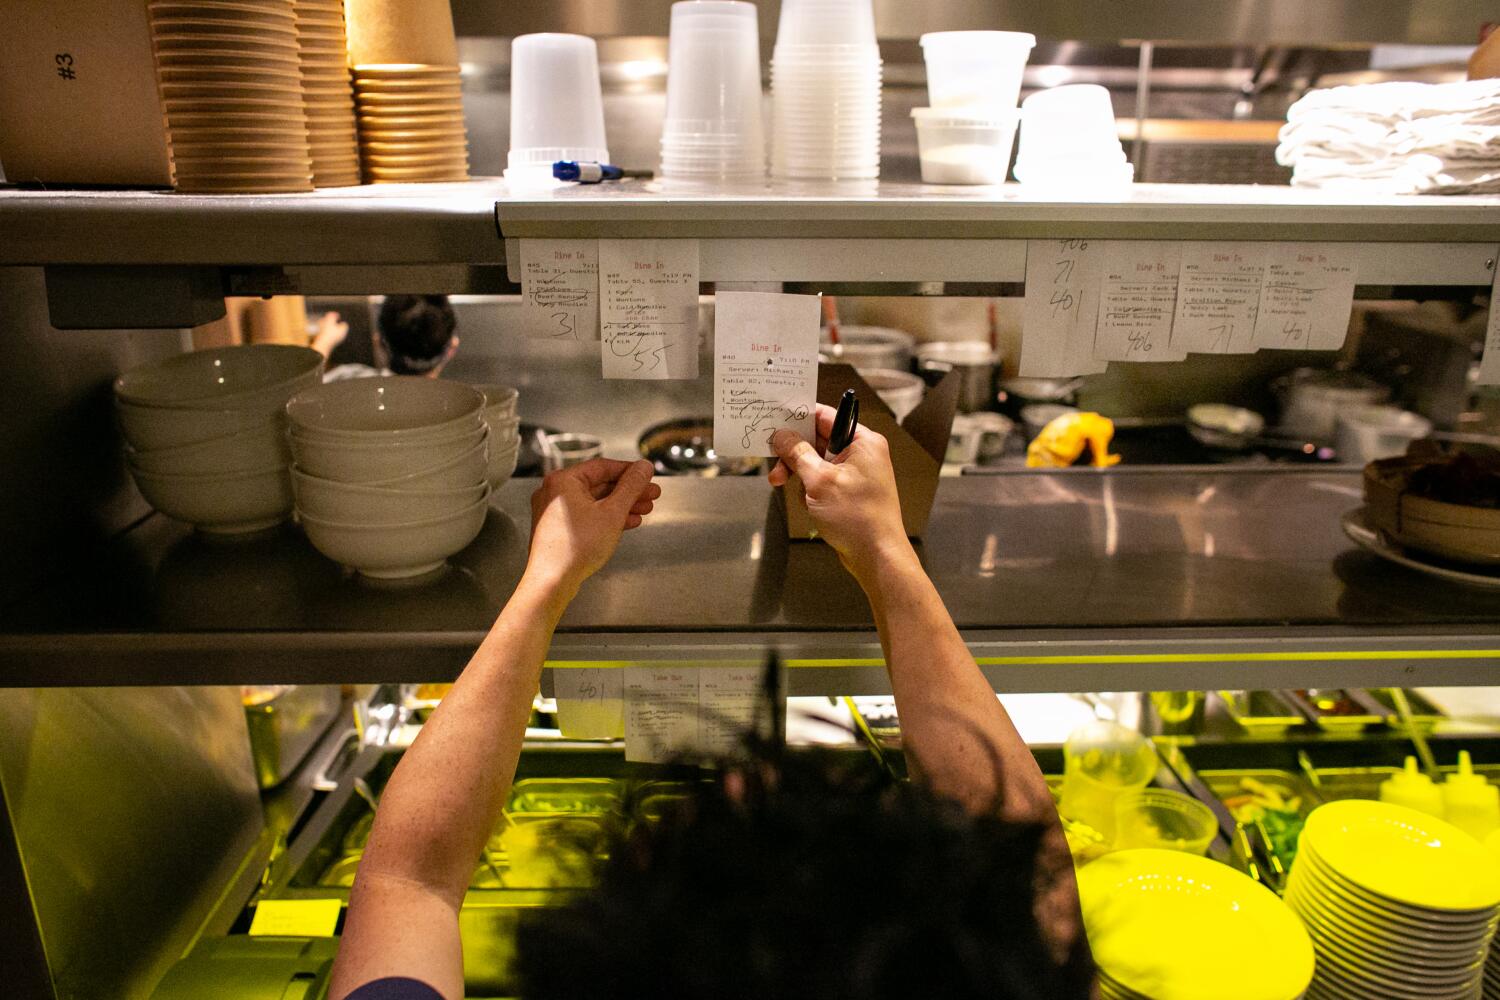 Restaurants could continue to charge service fees. Emergency measure clears hurdle